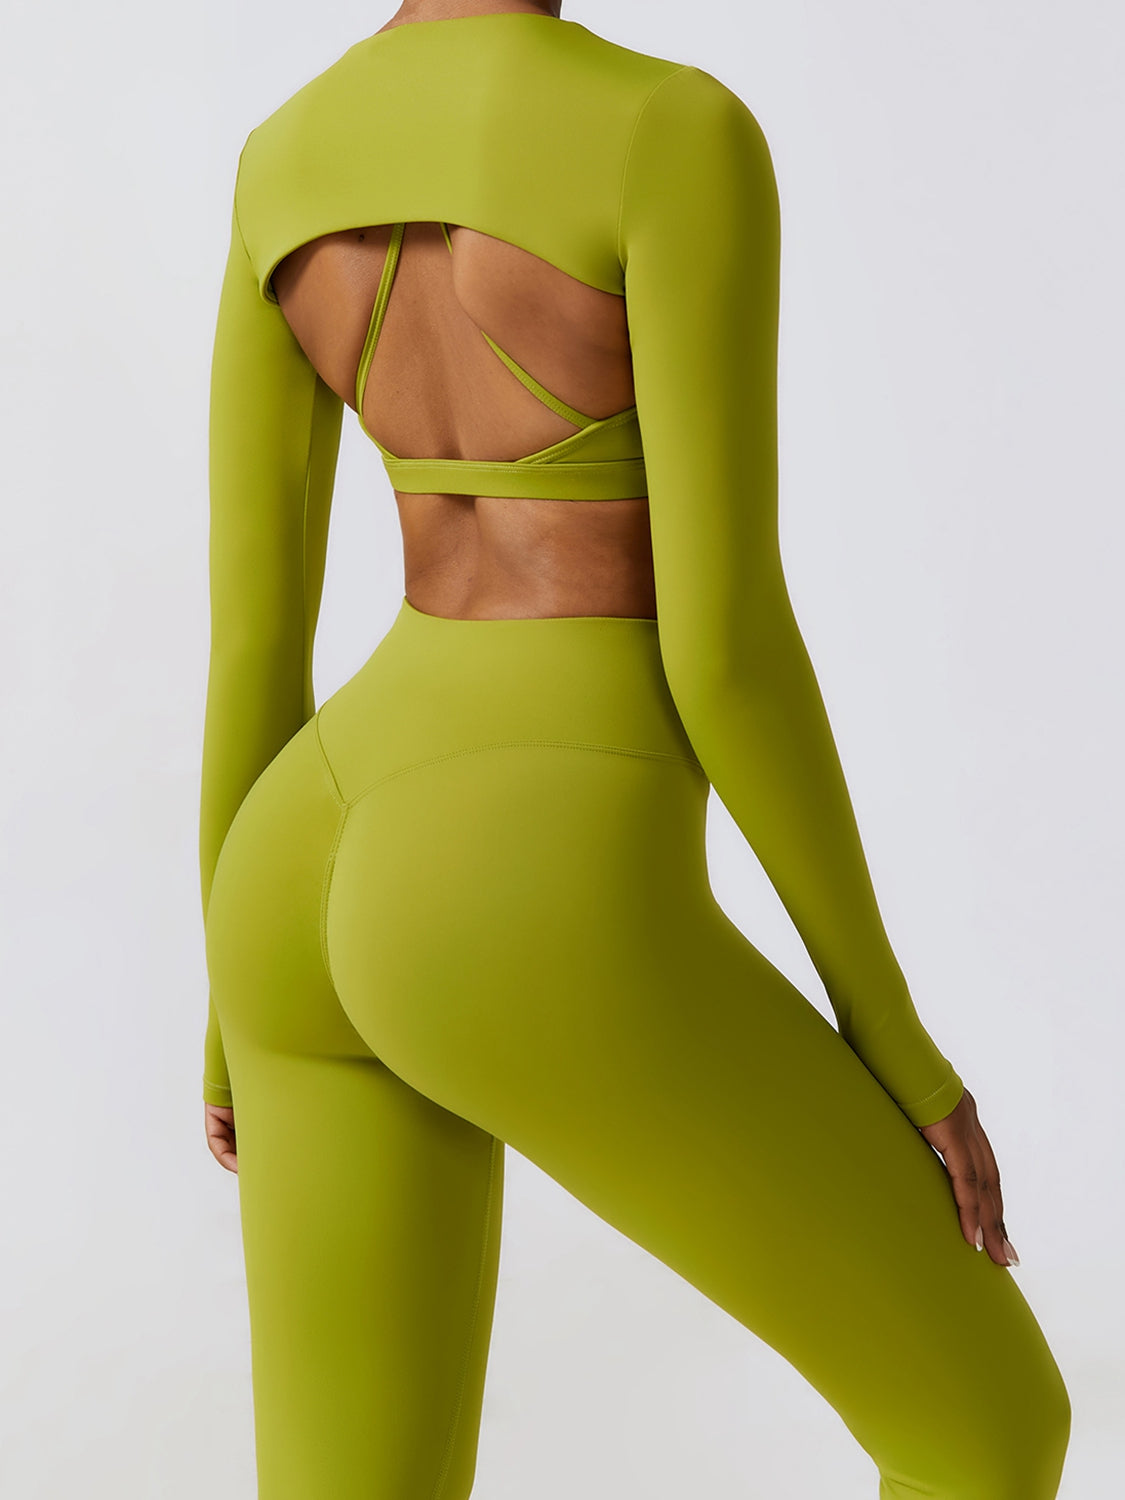 the back of a woman in a lime green sports suit